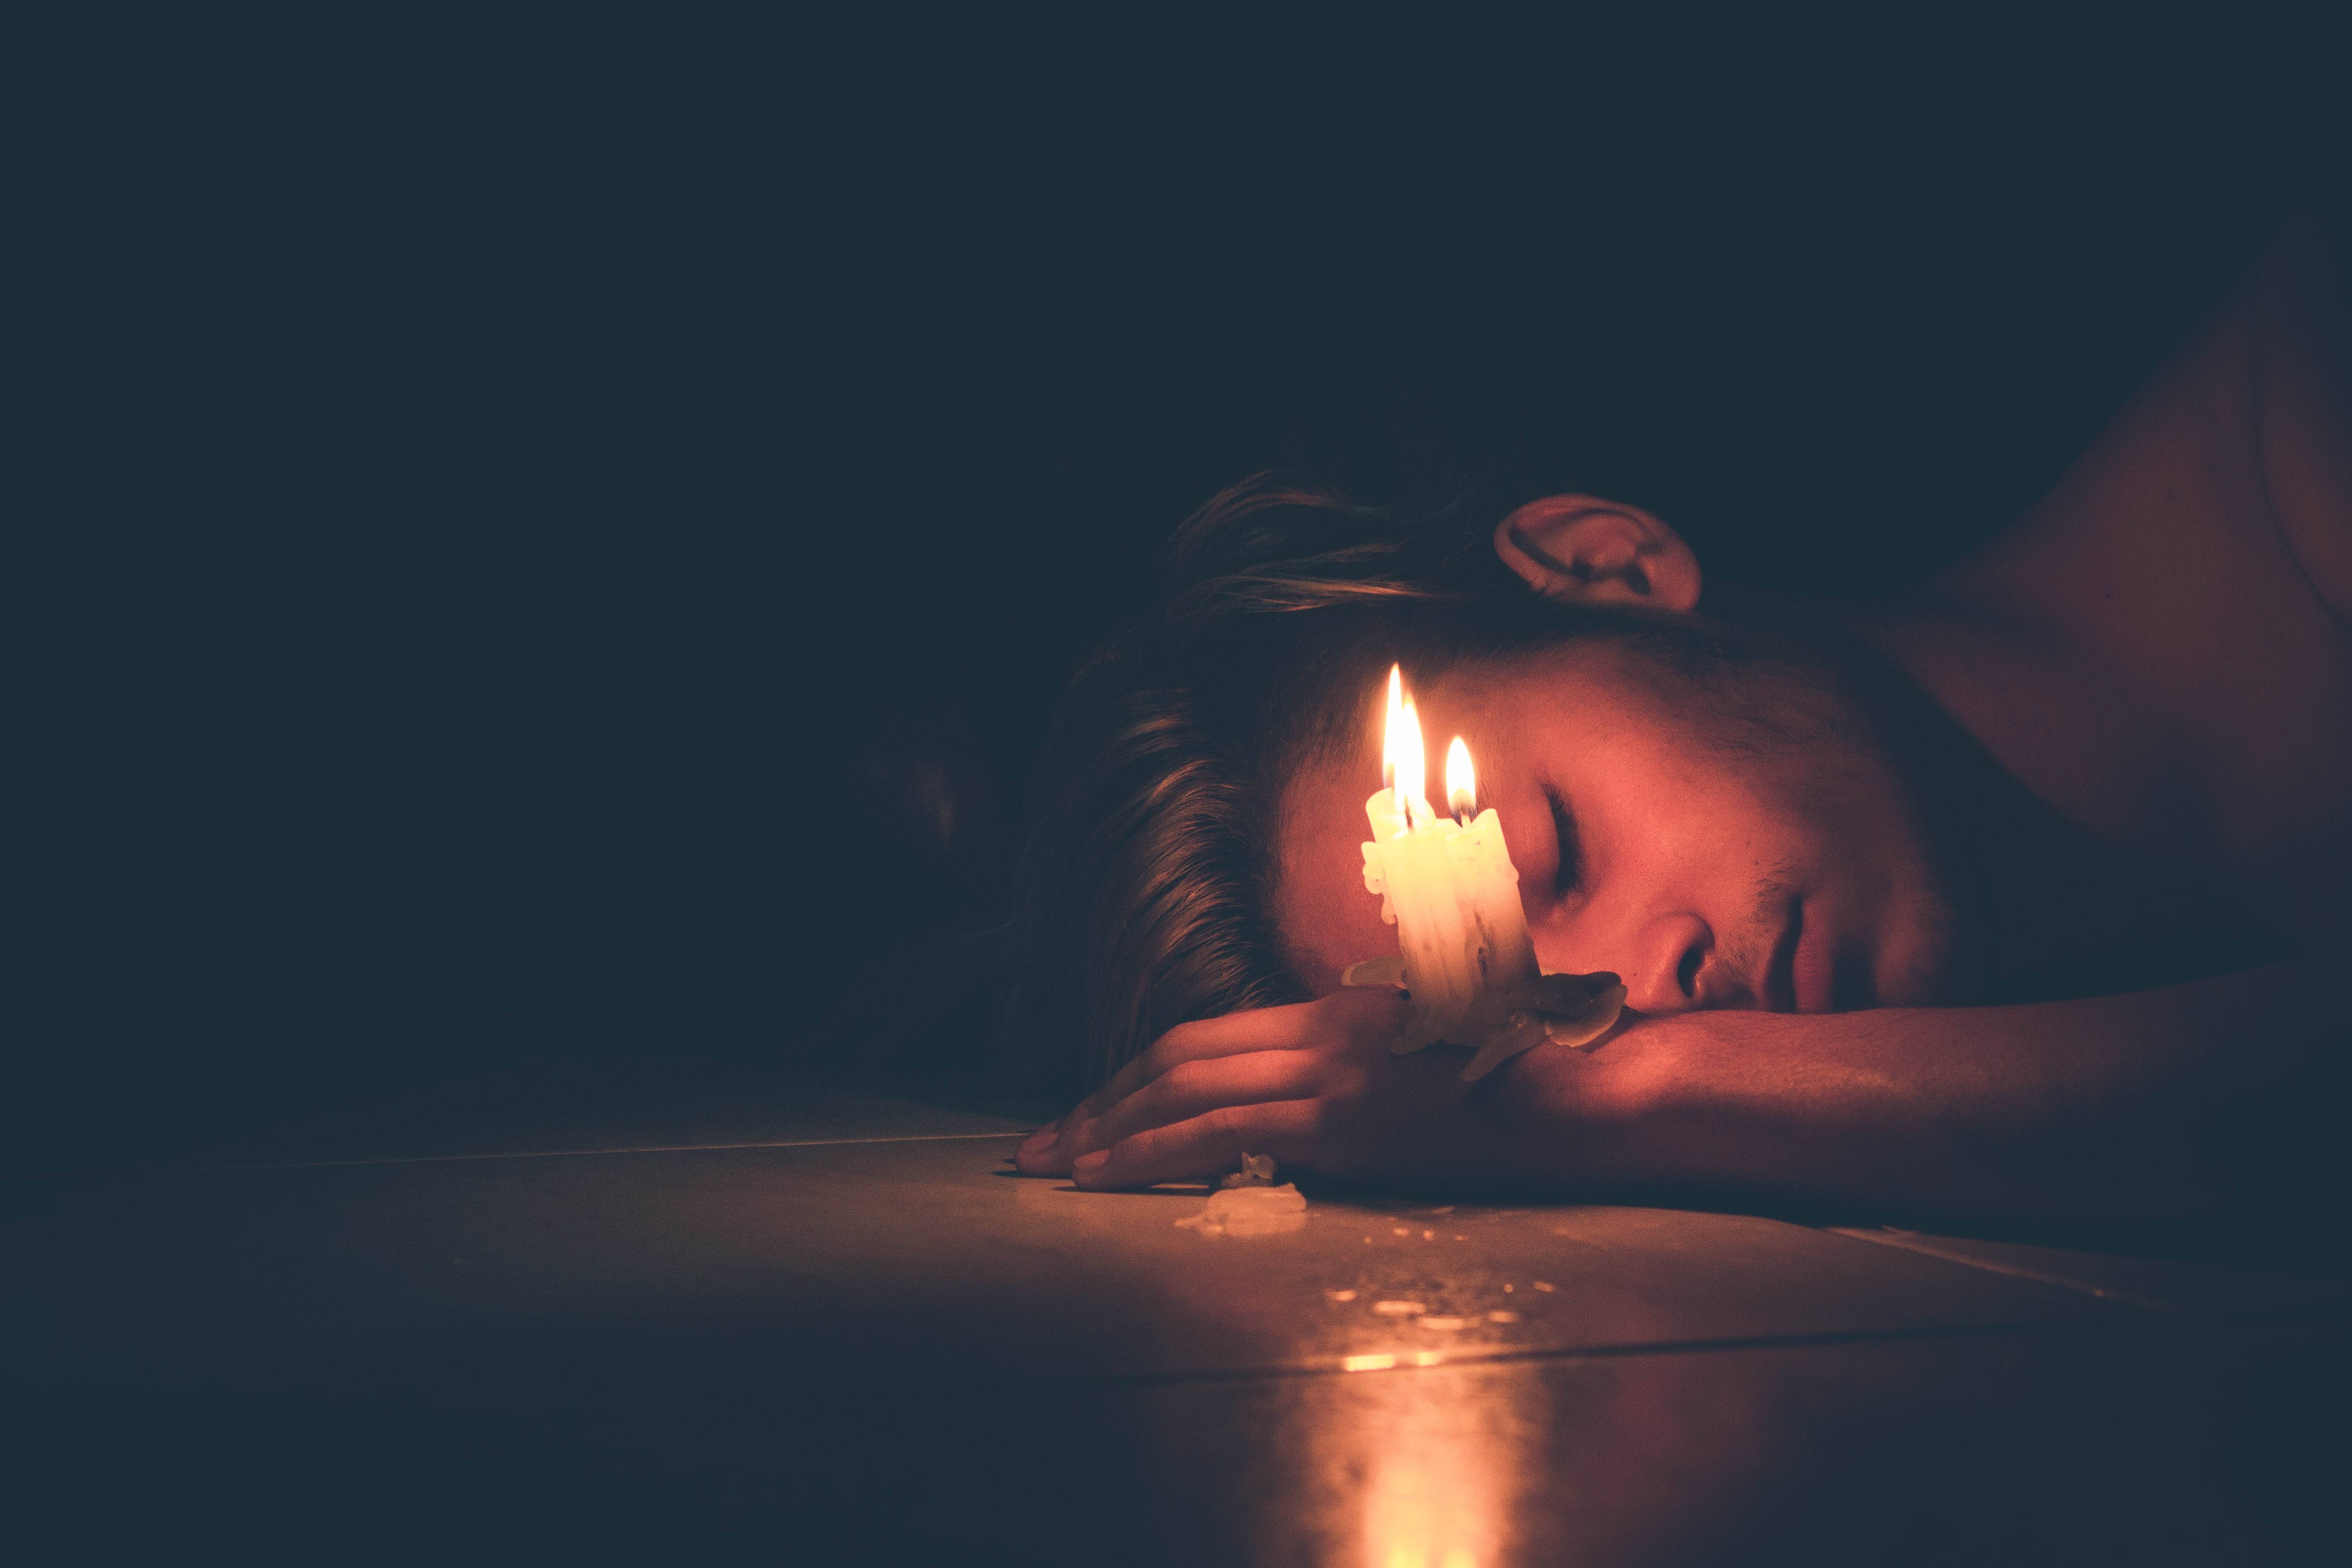 A man sleeping by a candle